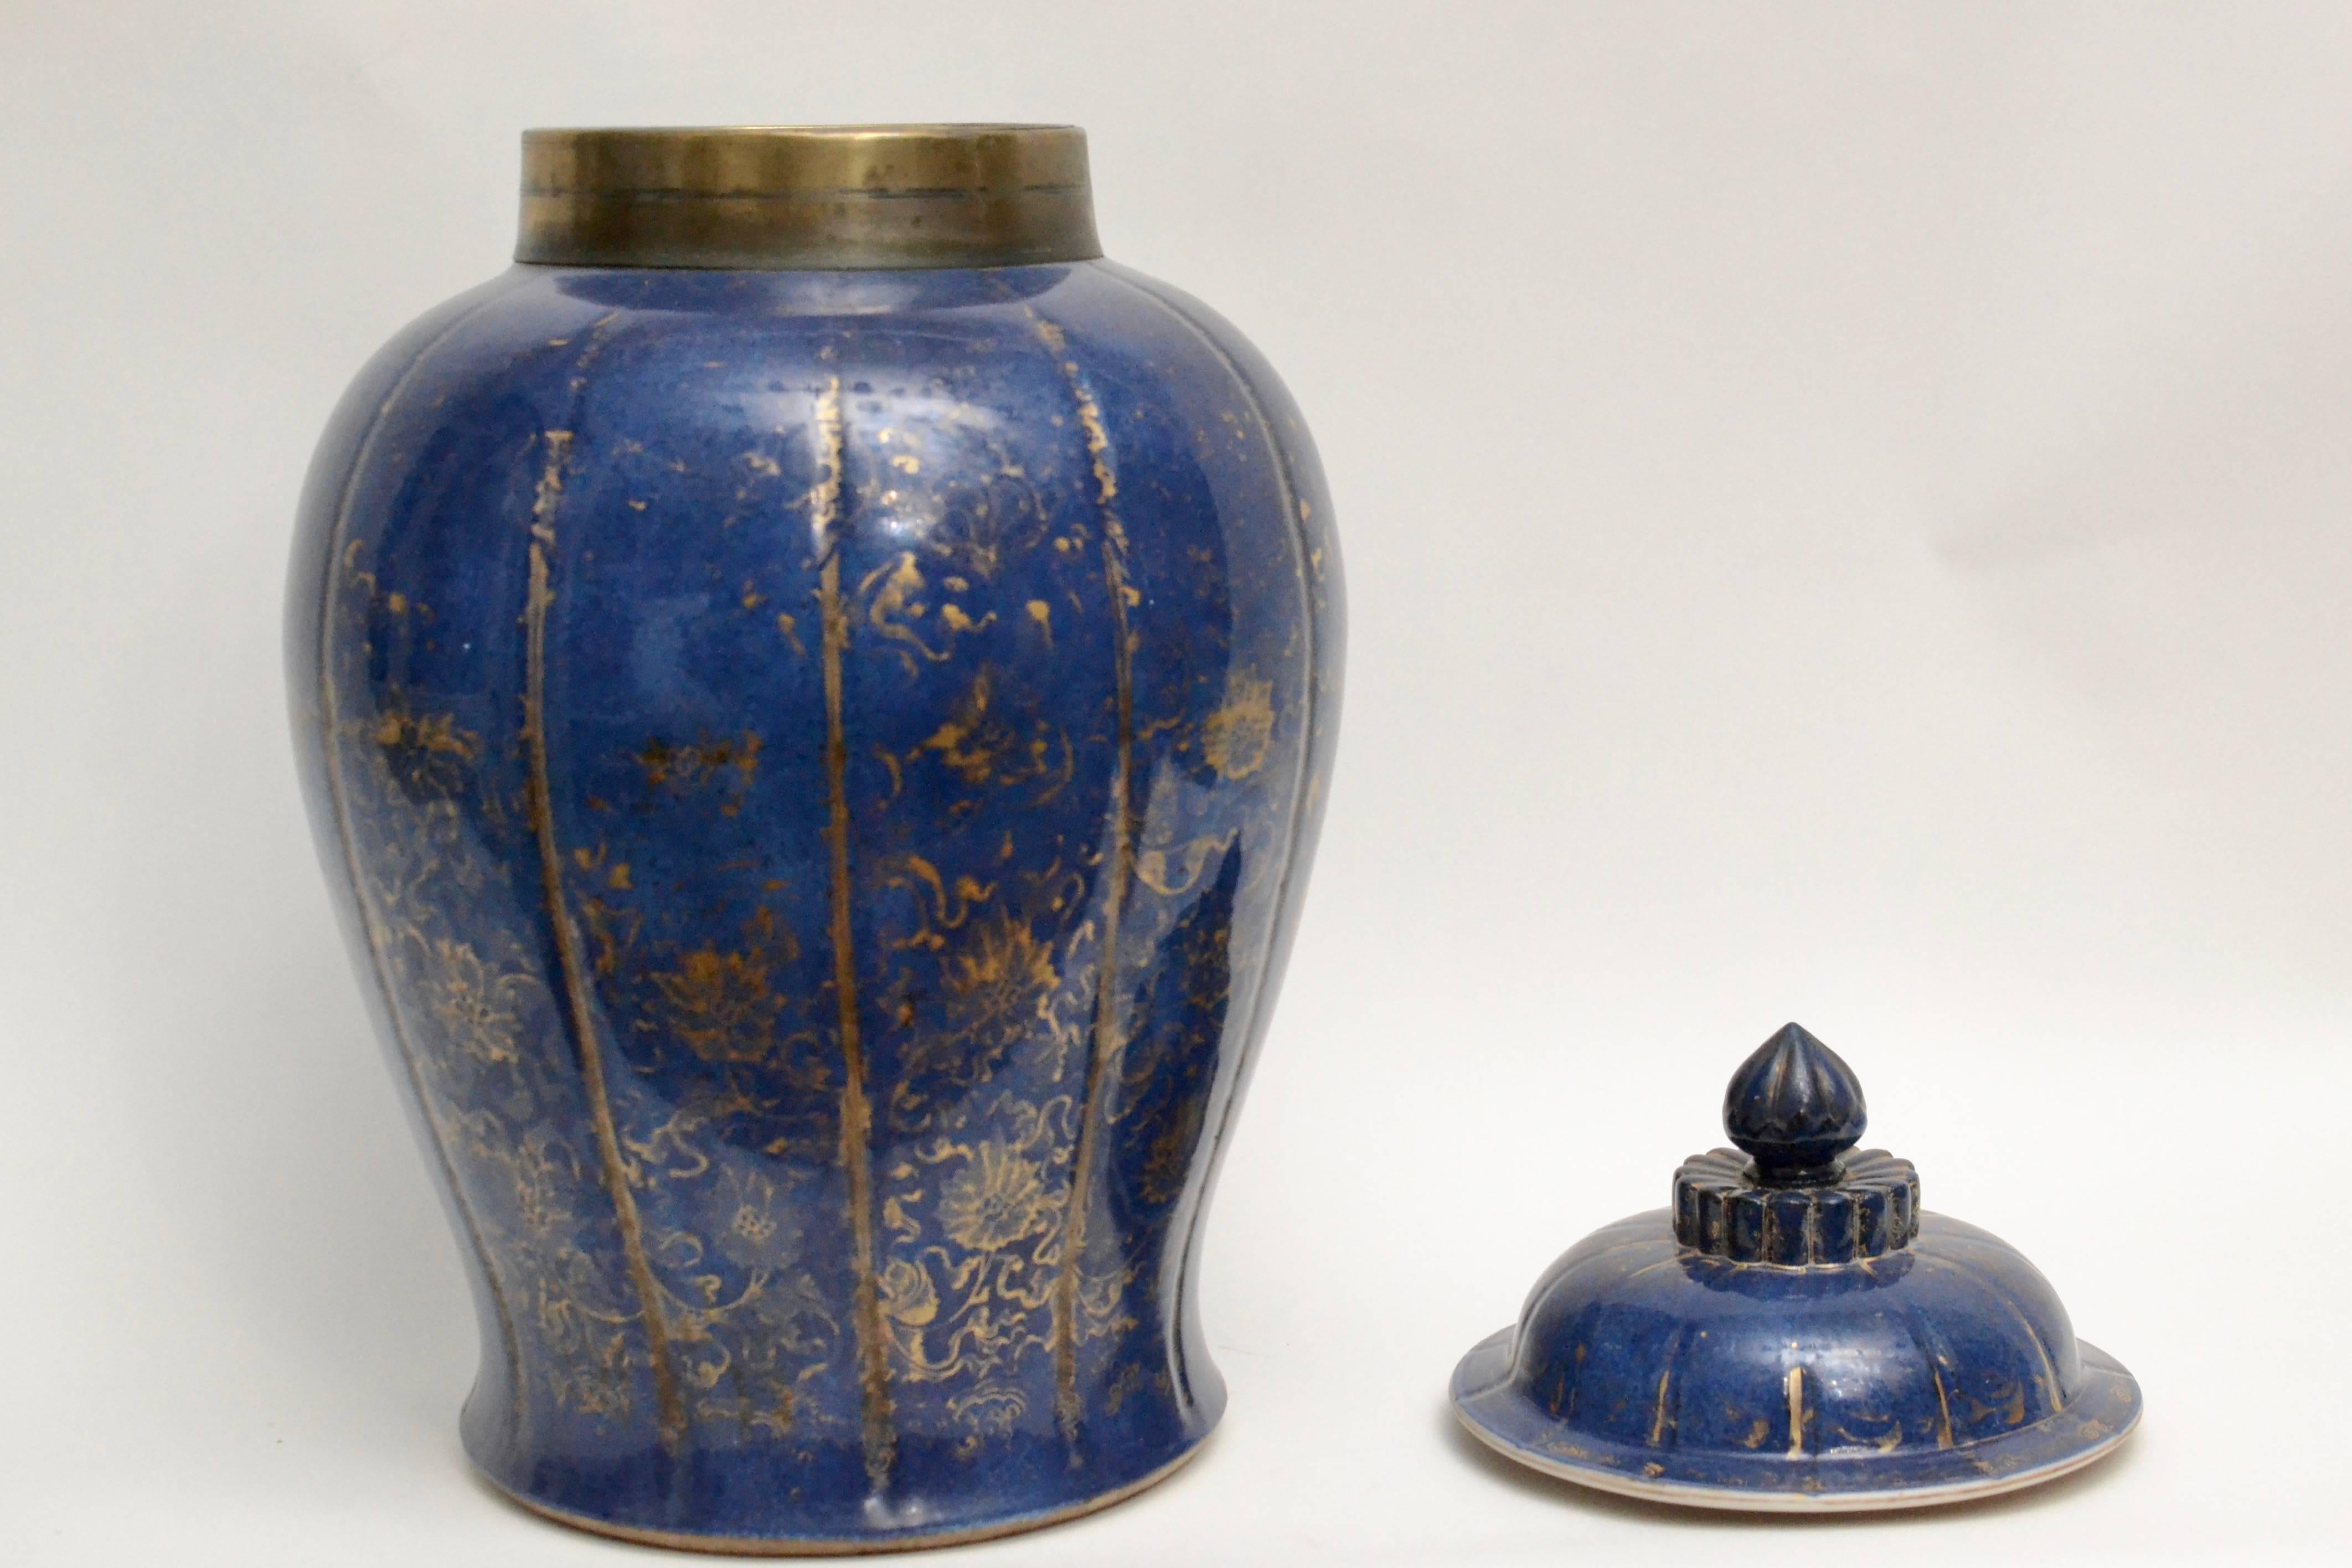 Chinese Export Chinese Powderblue Urn with a Lid from the Kangxi Period (1661-1722)